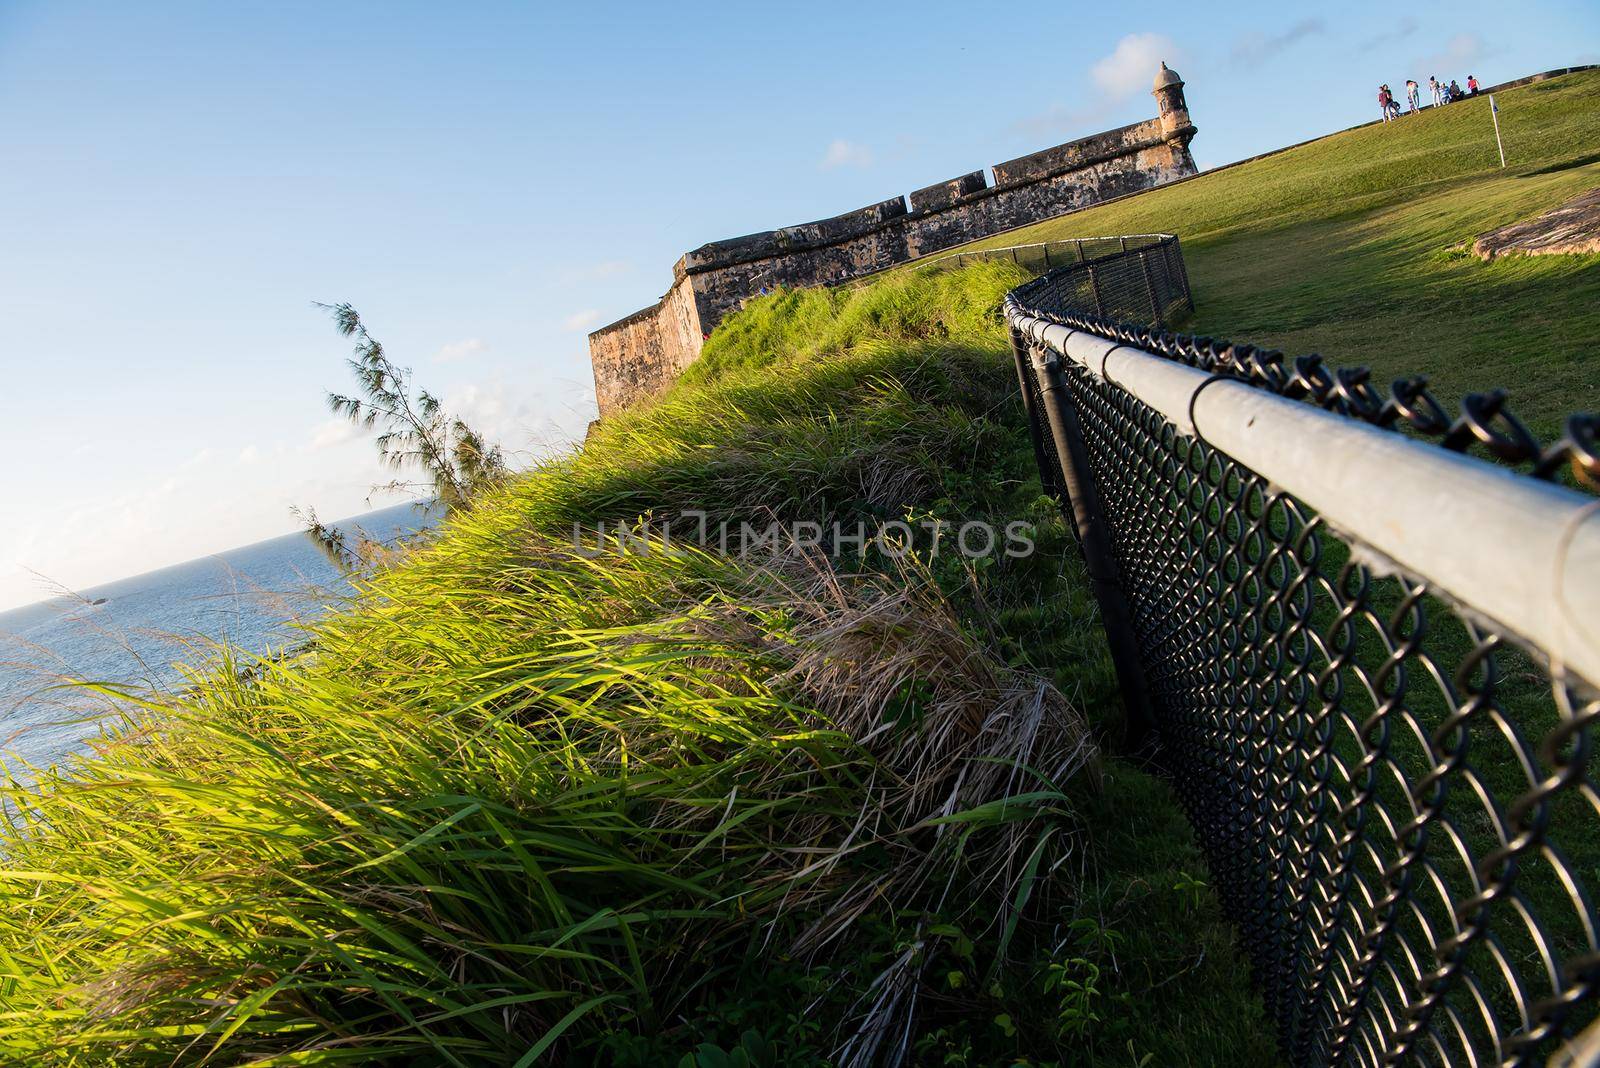 Abstract view of the castle in San Juan, Puerto Rico at sunset. Generations of soldiers lived at the fort and visitors today are inspired by the stories and architecture.